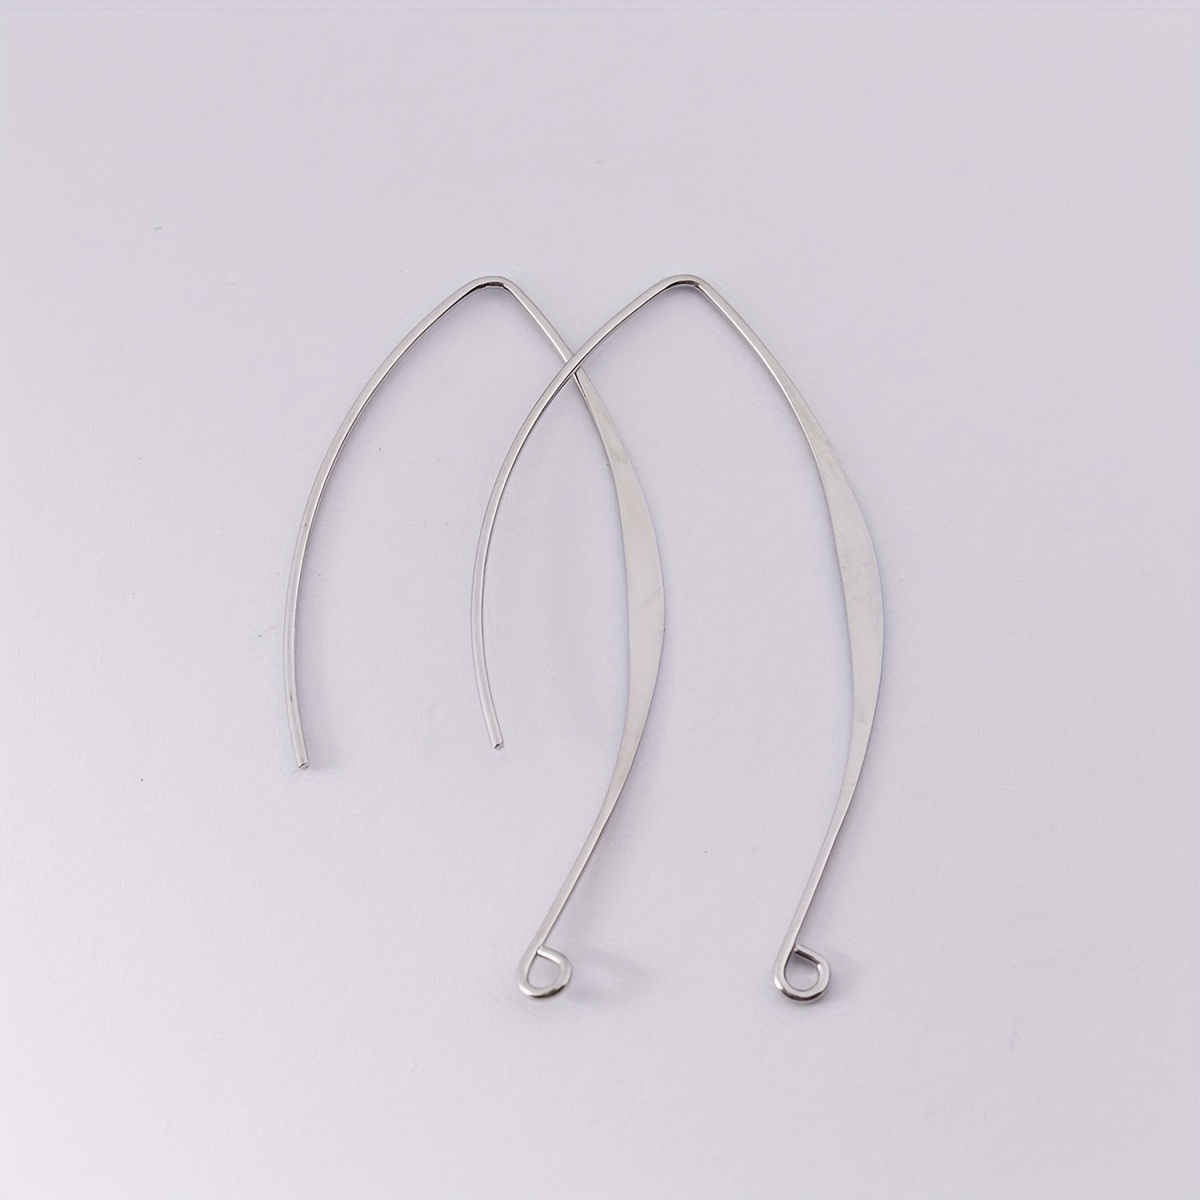 Wholesale Stainless Steel French Earring Hooks 